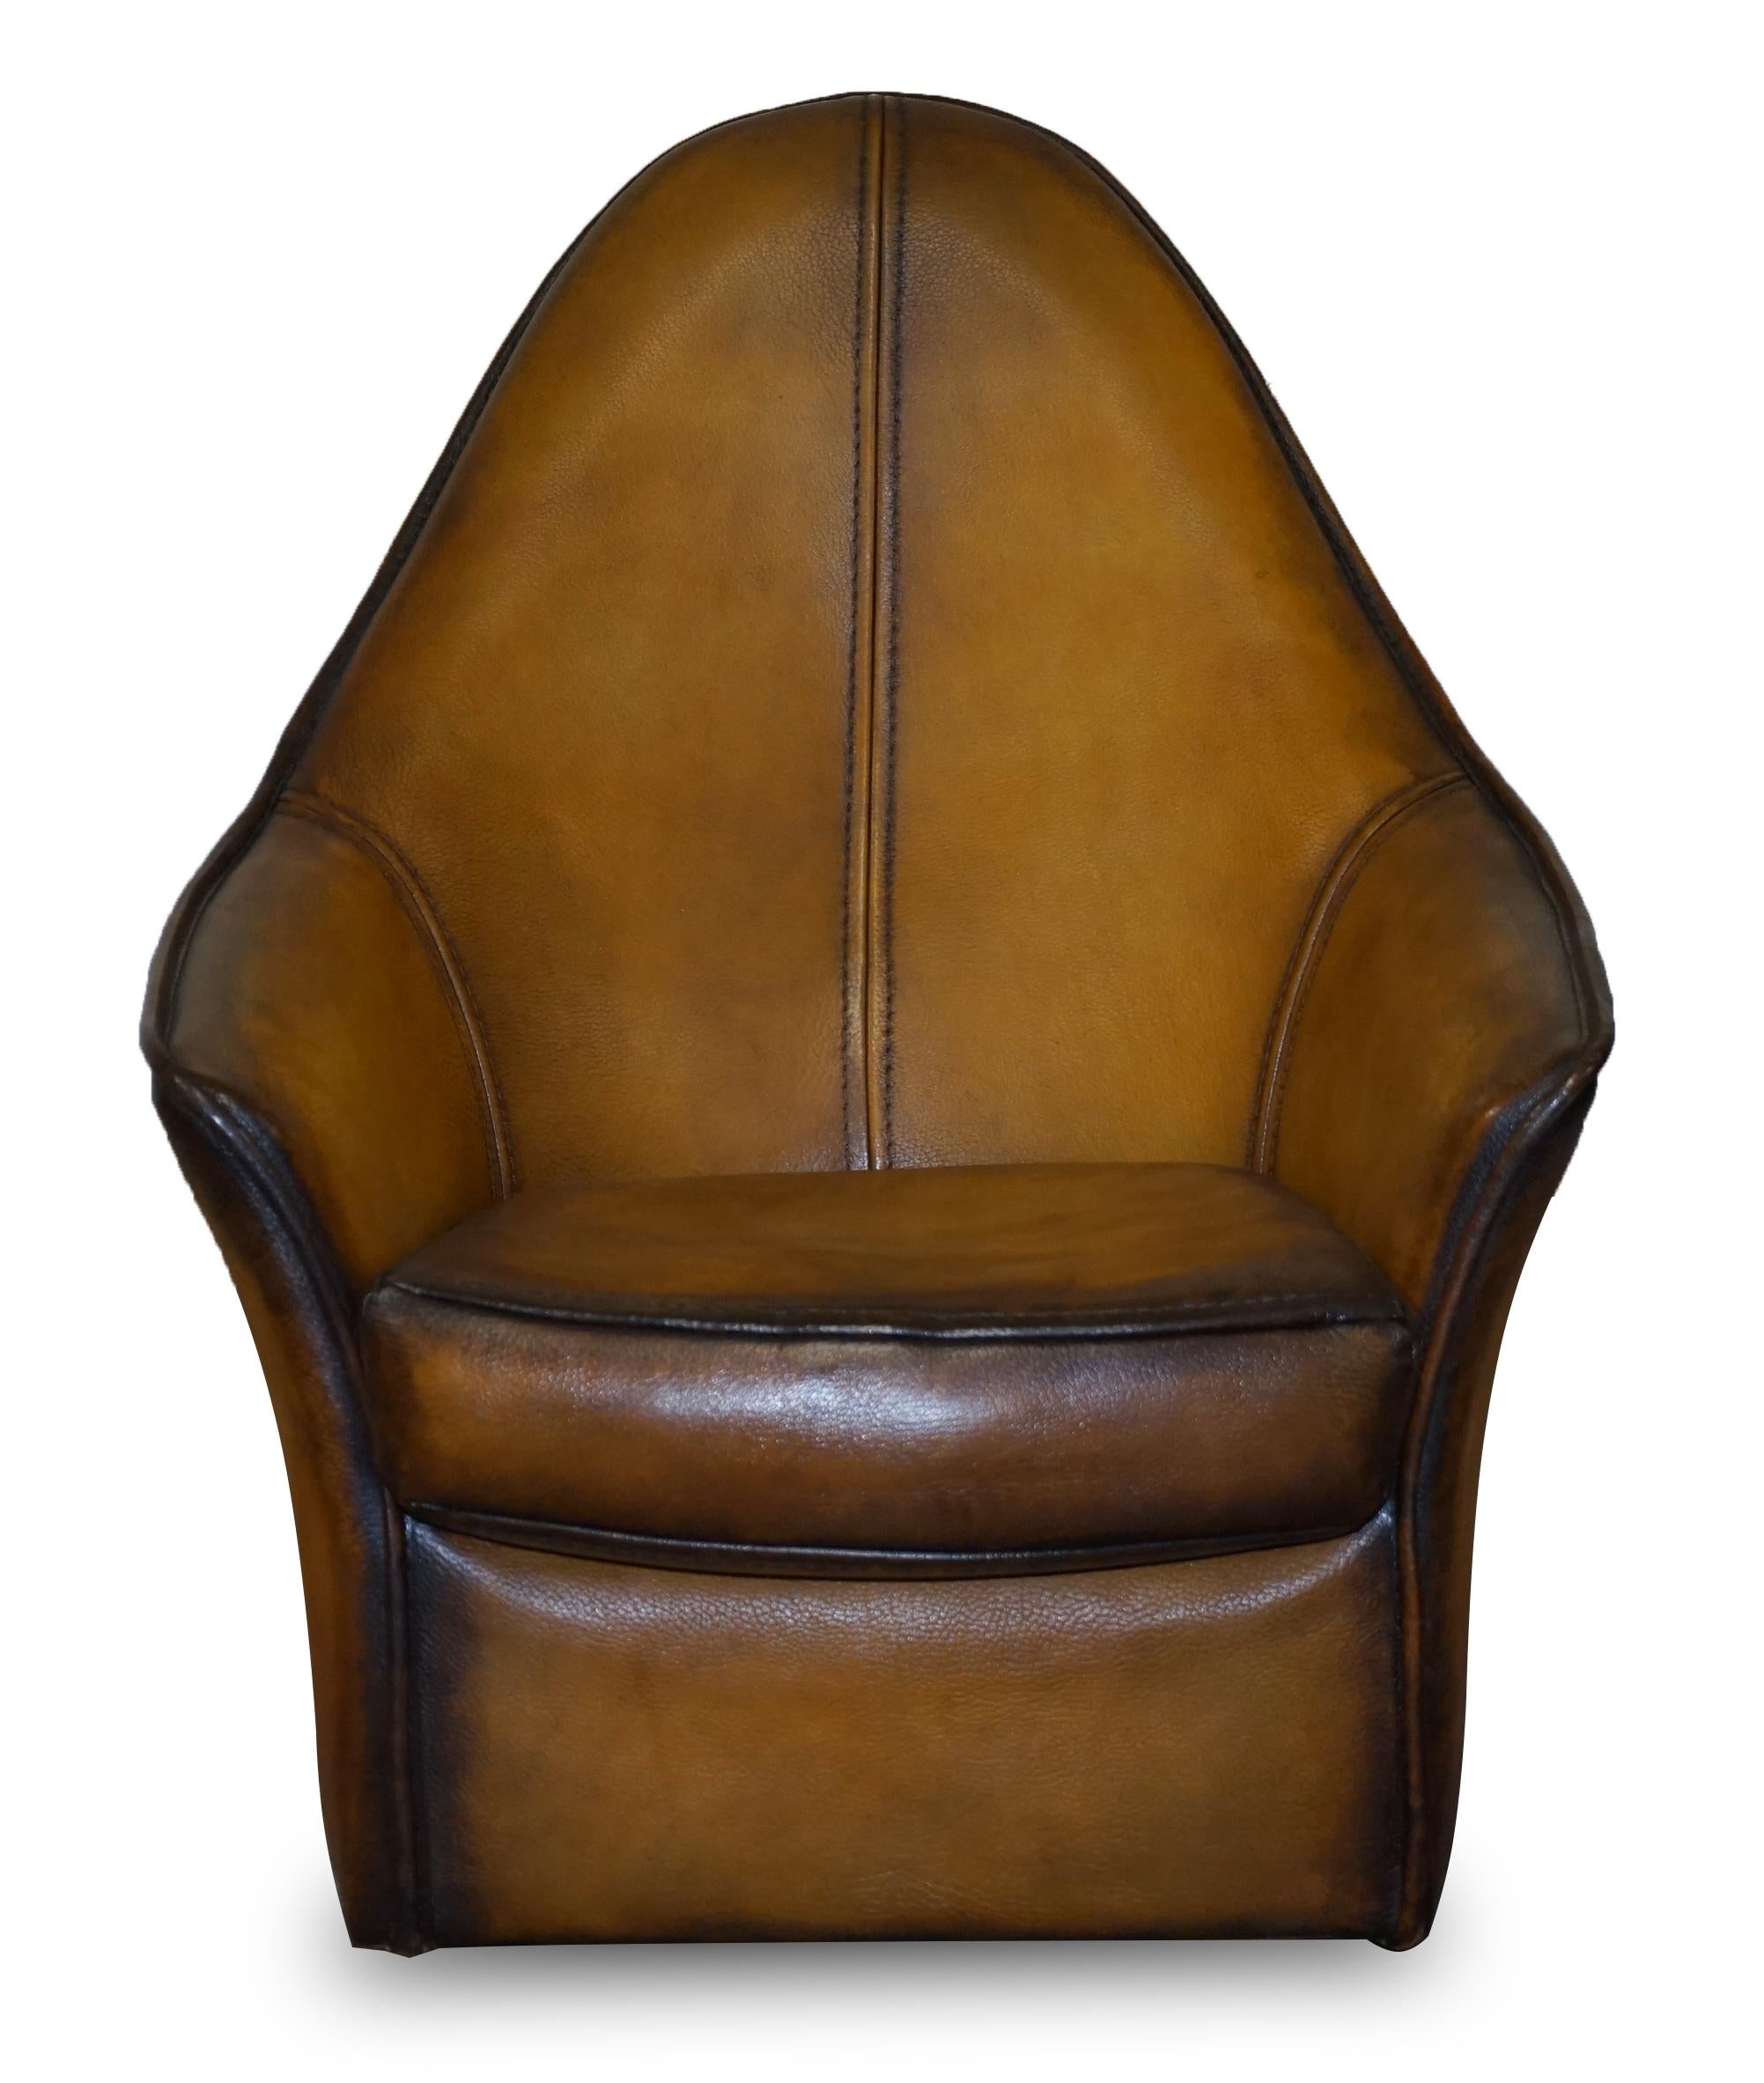 Pair of Restored Art Modern Curved Back Brown Leather Armchairs Part of Suite For Sale 6